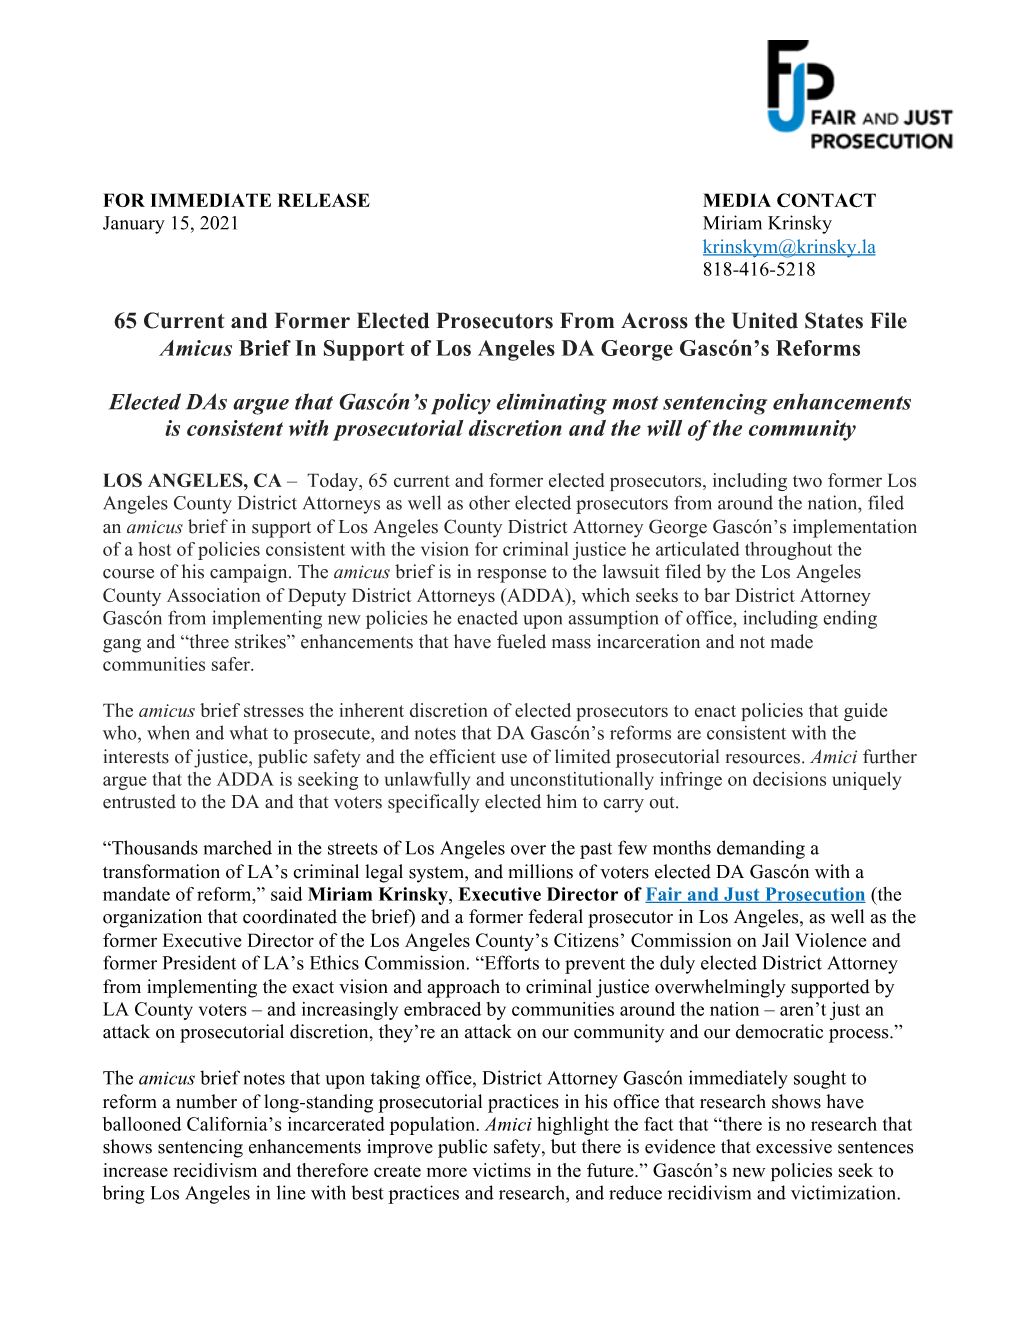 65 Current and Former Elected Prosecutors from Across the United States File Amicus Brief in Support of Los Angeles DA George Gascón’S Reforms ​ ​ ​